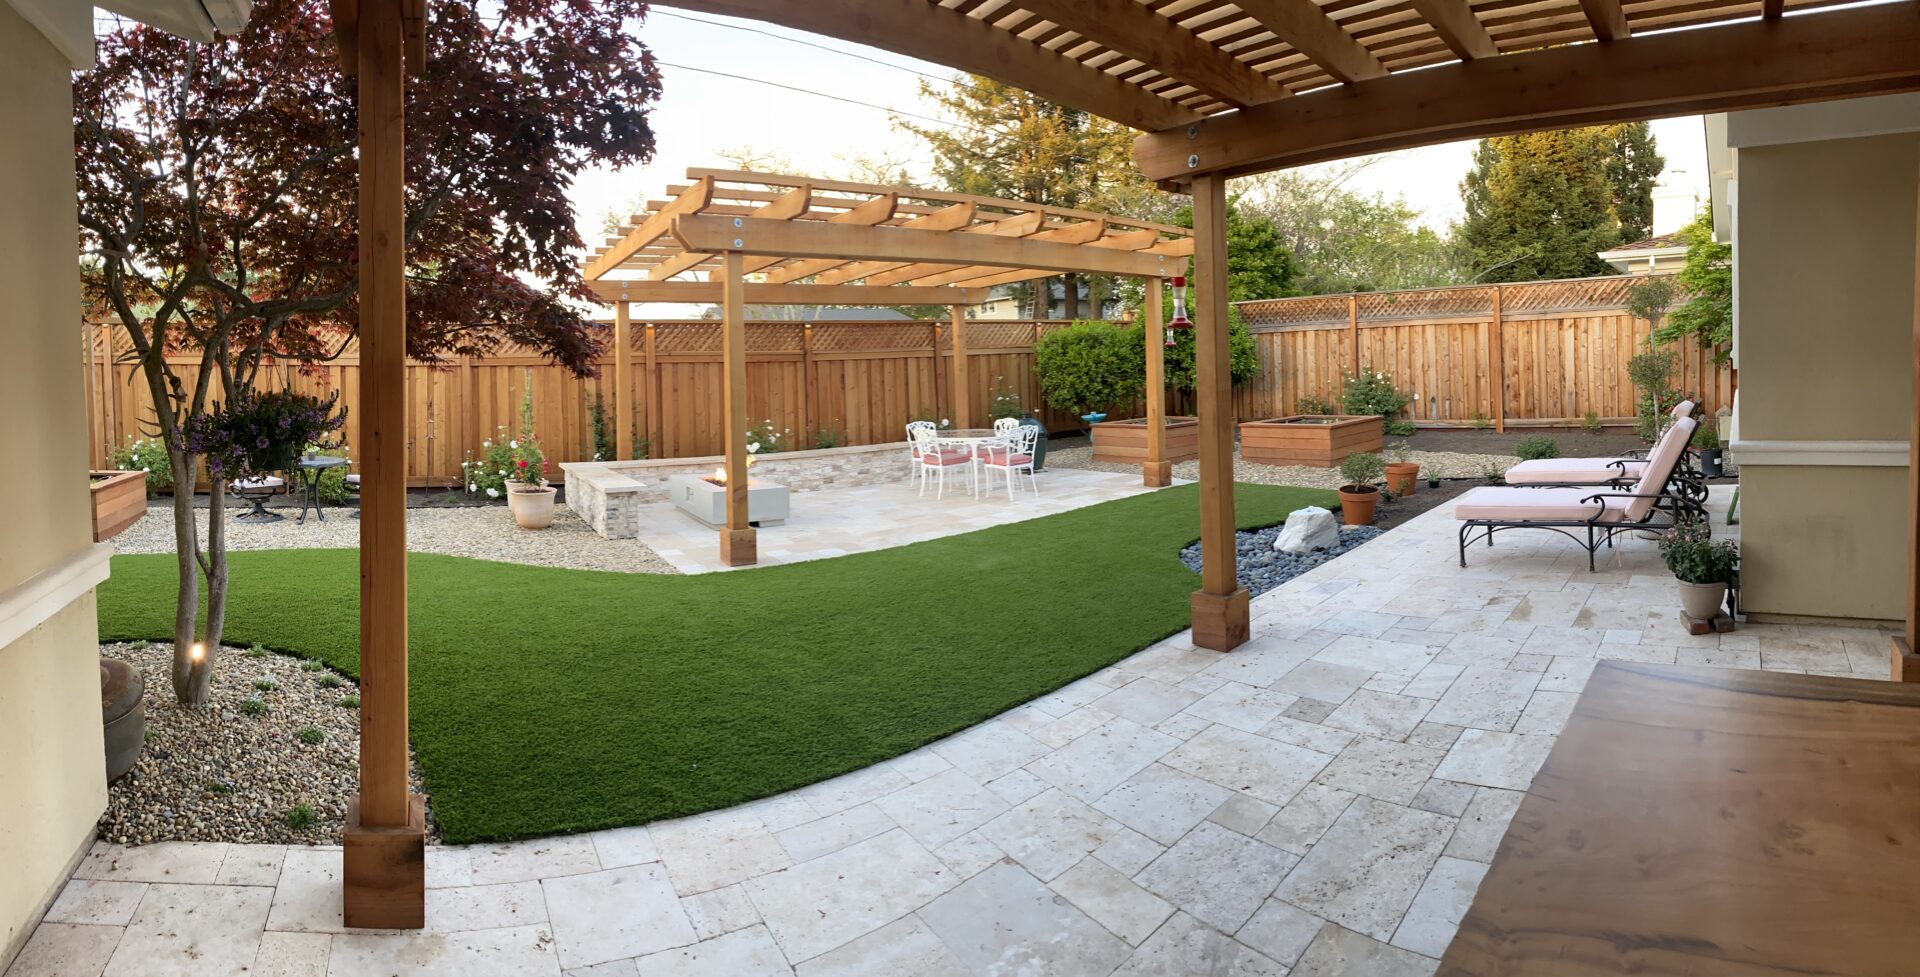 Artificial grass, gazebo, lawn chairs, landscaping by Guys Yard Design in Sonoma, CA